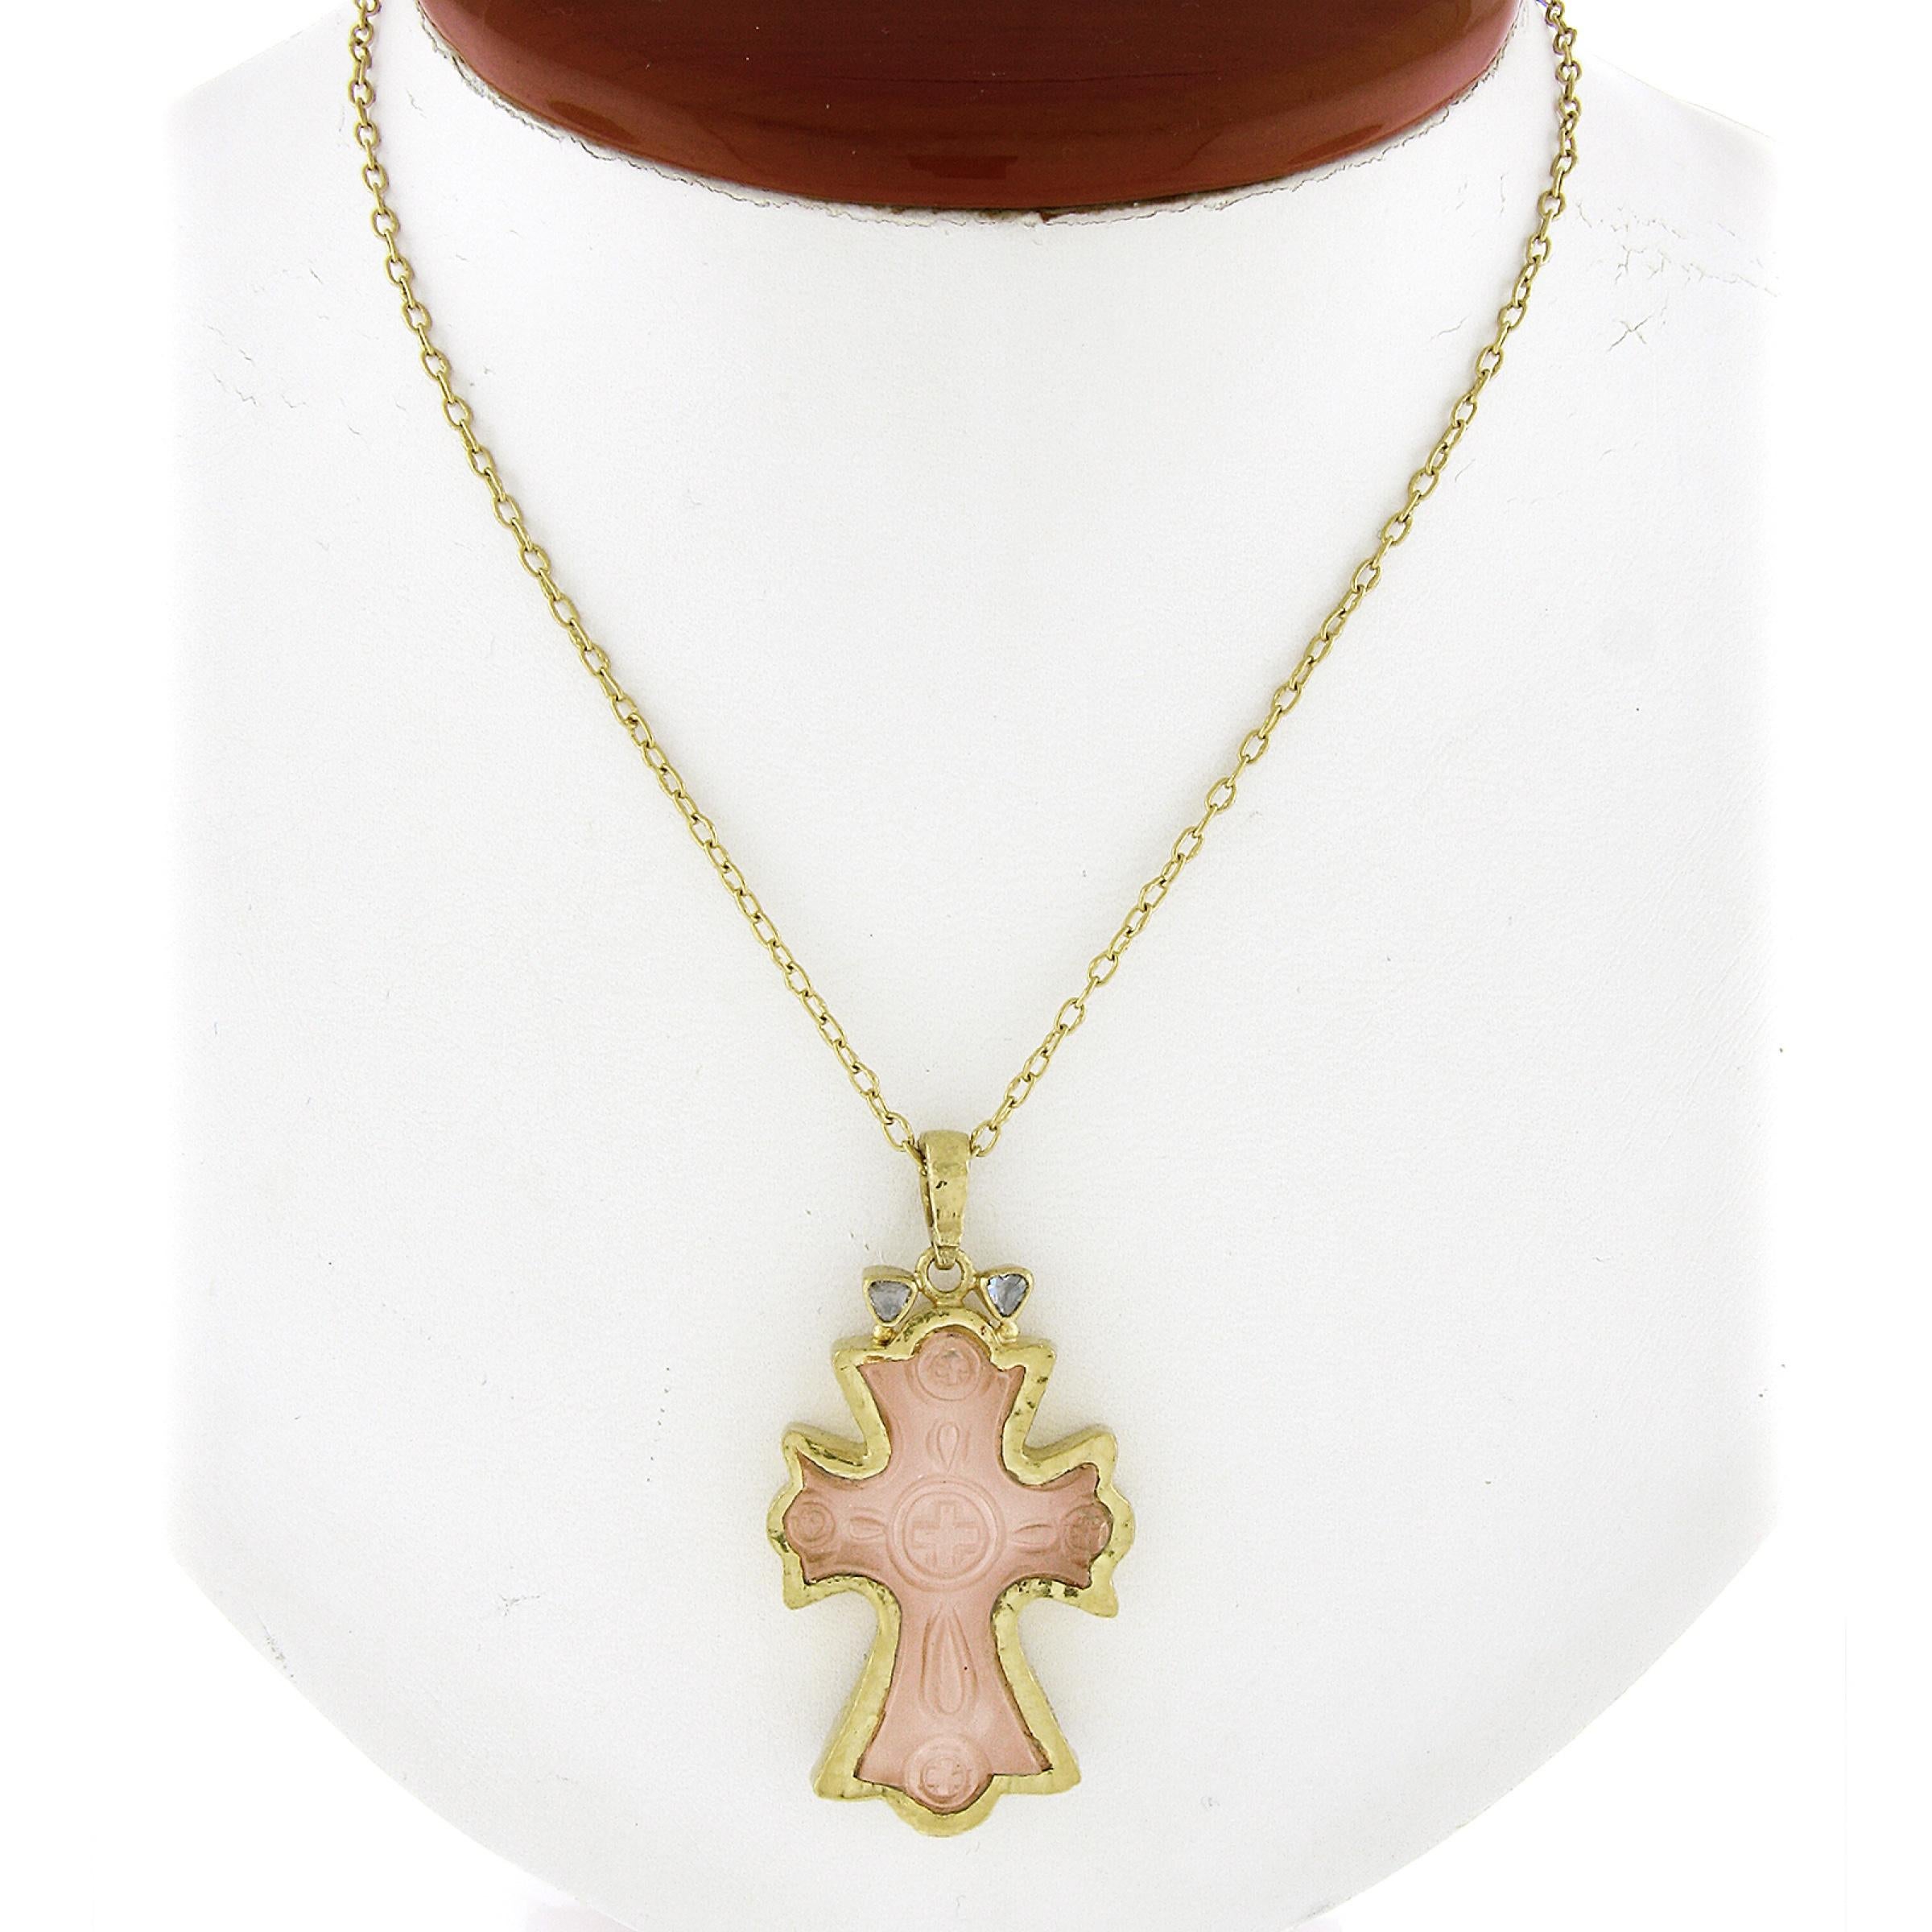 --Stone(s):--
(1) Natural Genuine Carved Rose Quartz- Cross Shape - Bezel Set - Light Pink Color 
(2) Natural Genuine Diamond - Rose Cut - Bezel Set 

Material: 23.76K - .990 Solid Yellow Gold 
Weight: 18.12 Grams
Chain Type: 1.2mm Cable Link